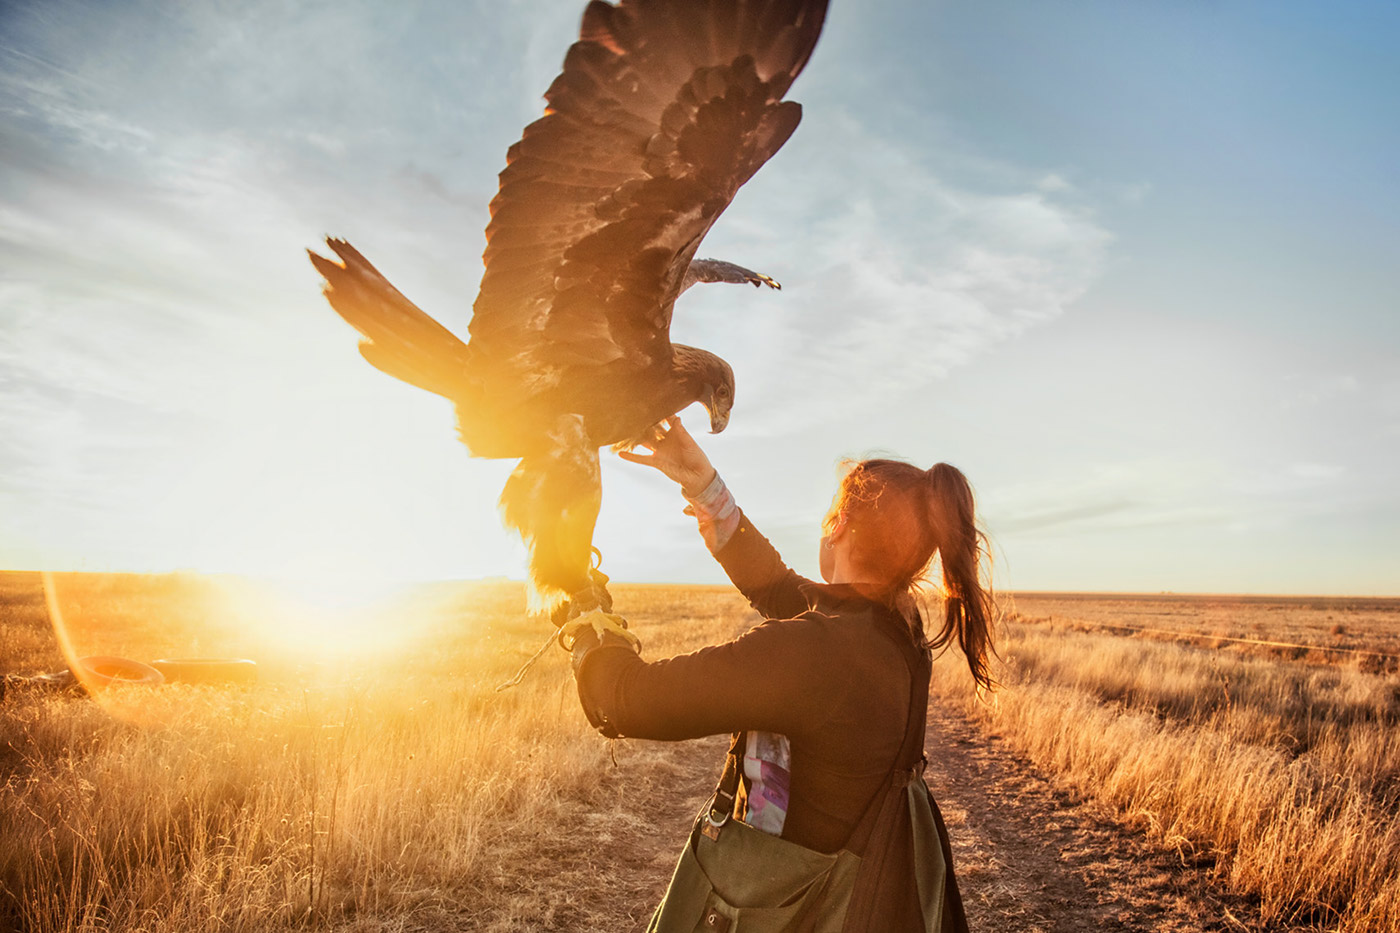 odd jobs short film Falconry inspiration human stories mongolia Golden Eagle conservation Nature buck the cubicle